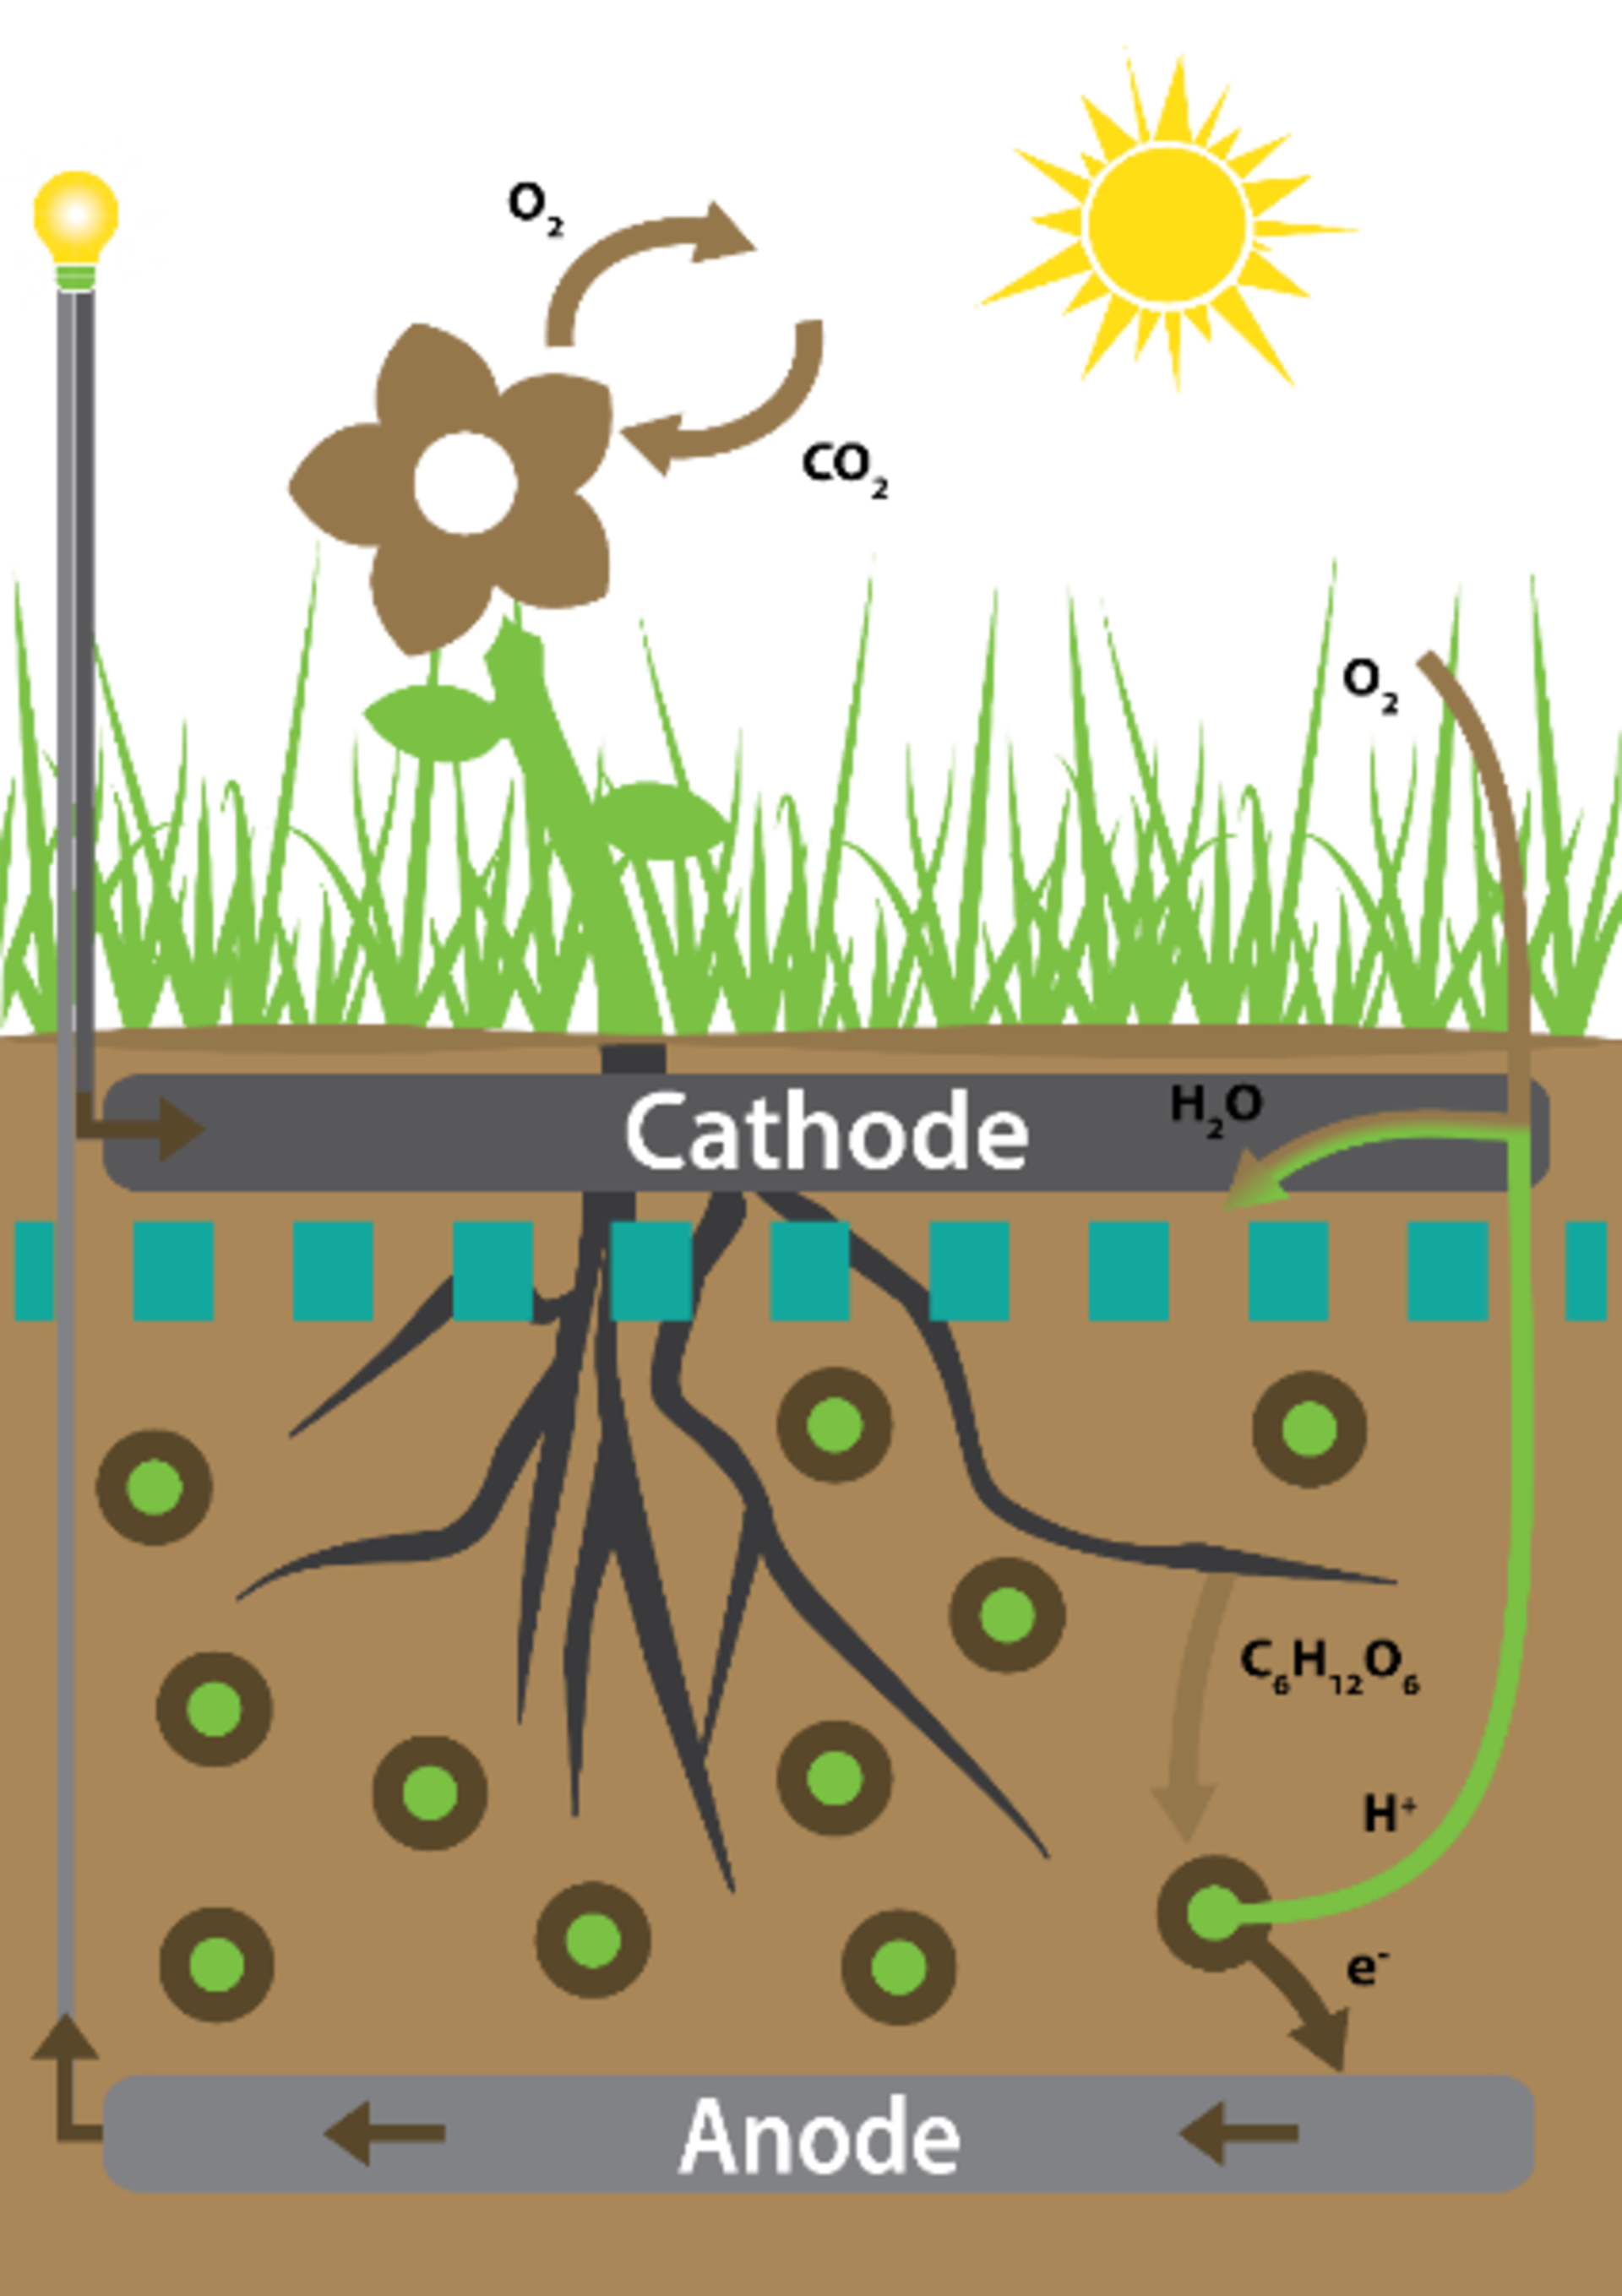 Bacteria around the roots release electrons